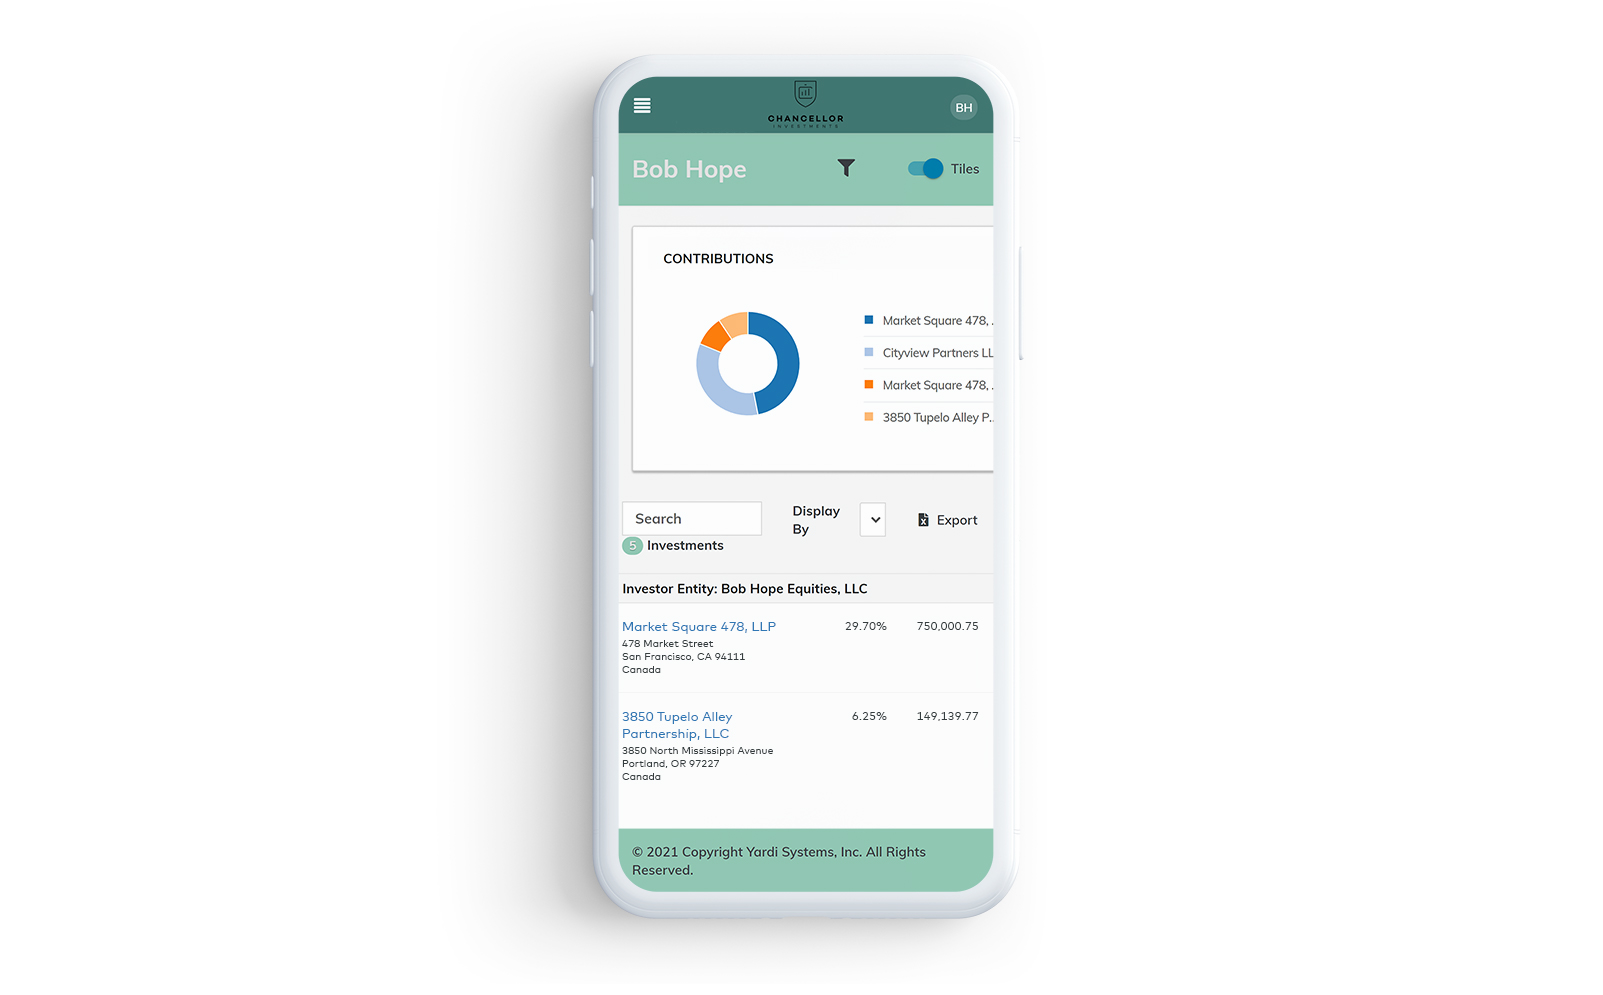 Your investors can access their portfolio from any device at any time through a branded portal. Responsive design means your investors can view their account data on any mobile device.